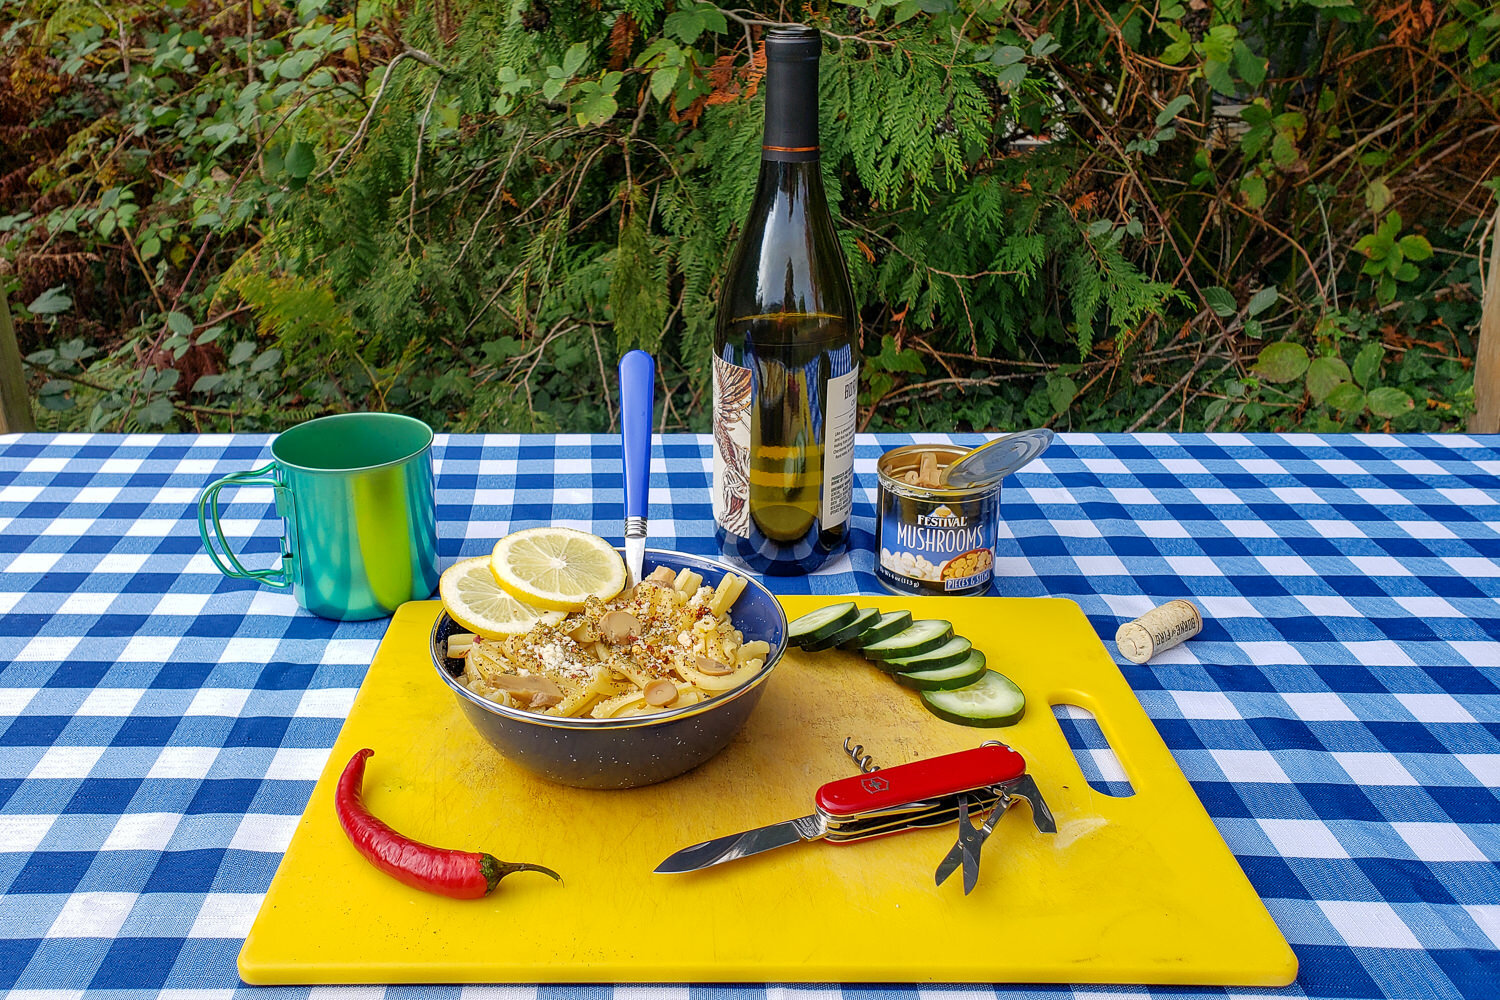 A multitool like tHE VICTORINOX SWISS ARMY HUNTSMAN can be really helpful in the camp kitchen